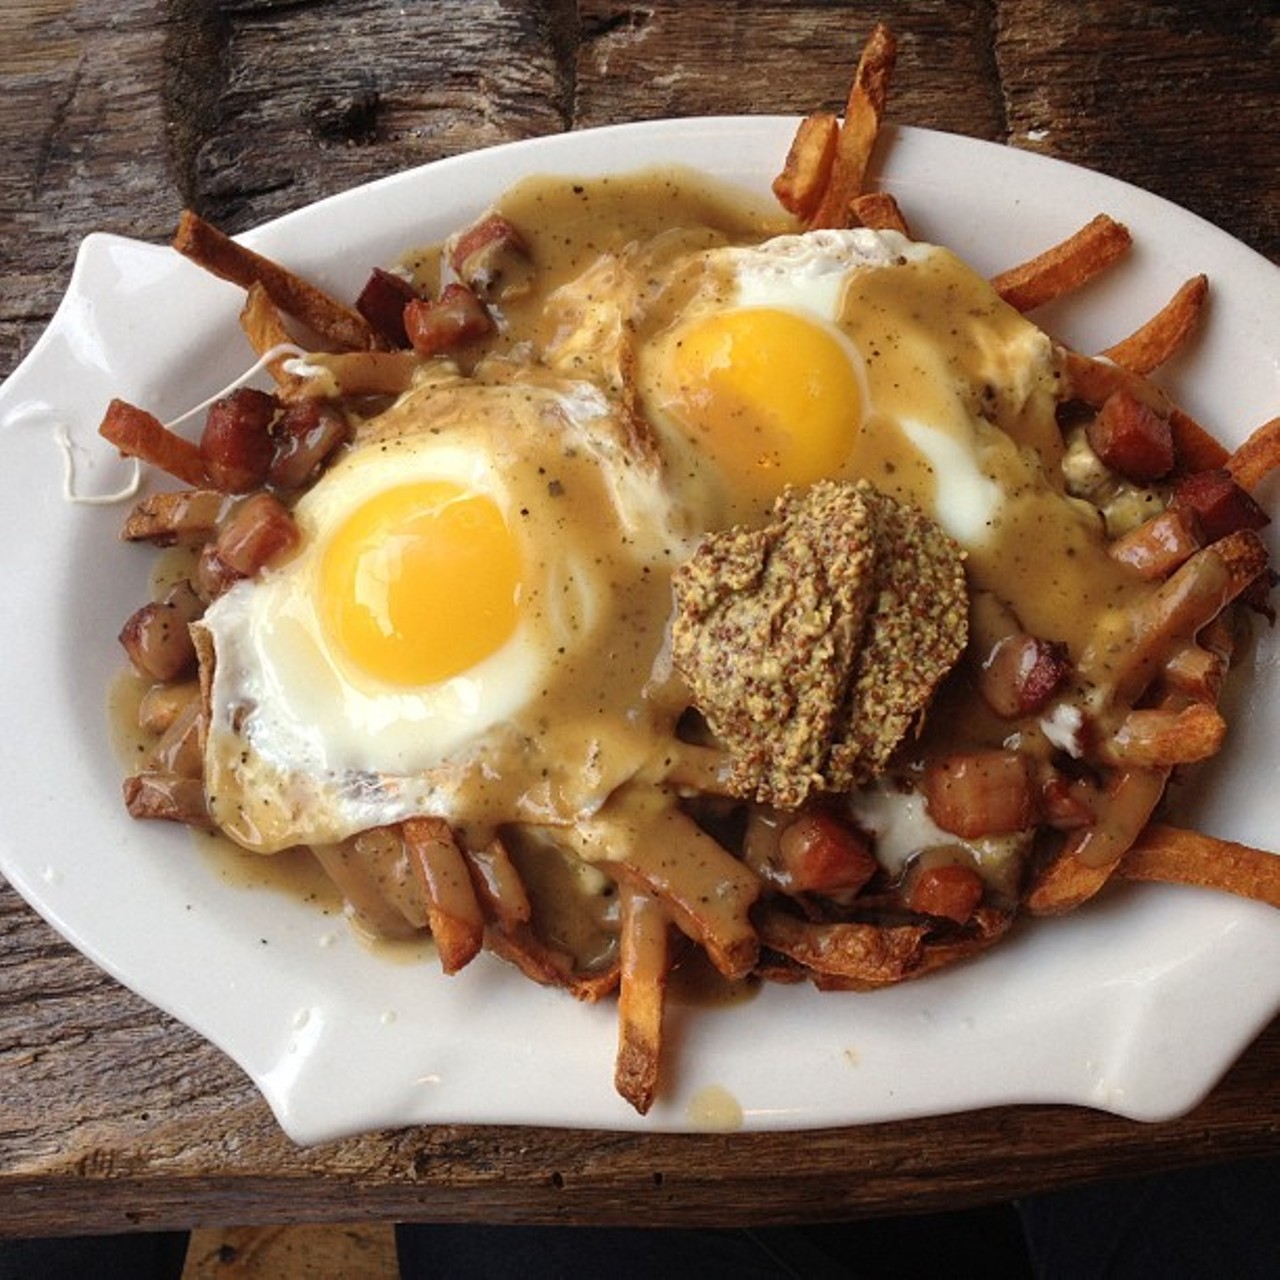 Perfectly crispy frites smothered with whole grain mustard, mozzarella cheese curd & brown gravy. Then finished off with fried eggs and the best for last -- bacon! The Greenhouse Tavern is located at 2038 E 4th St. Call 216-443-0511 or visit the greenhousetavern.com for more information.